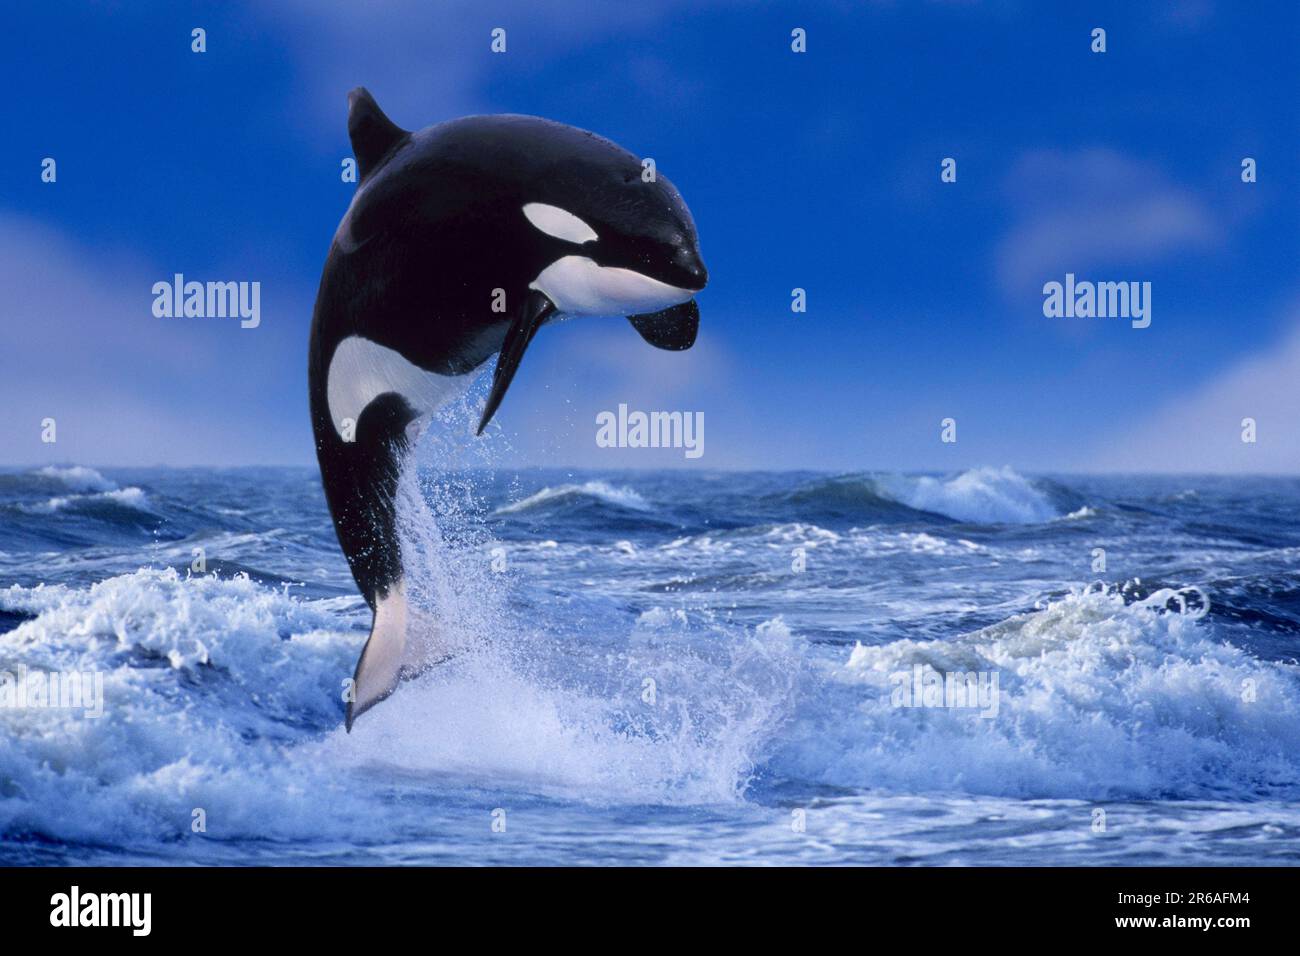 Orca, killer whale (Orcinus orca), Orka (animals) (outdoor) (adult) (movement) (motion) (jump) (jumping) (power) (joy of life) (mammals) (mammals) Stock Photo